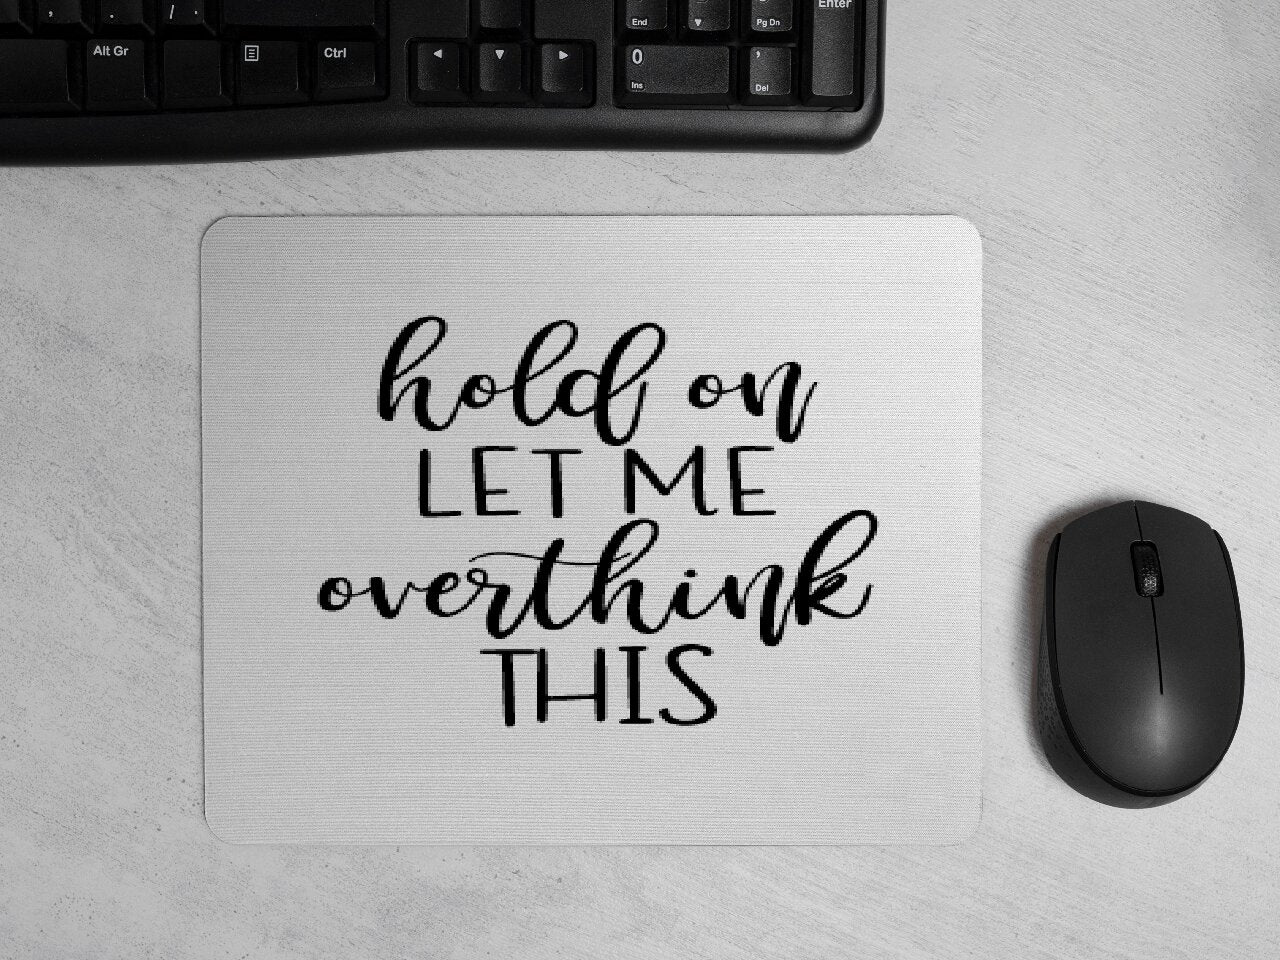 Hold On Let Me Overthink This - Mouse Pad